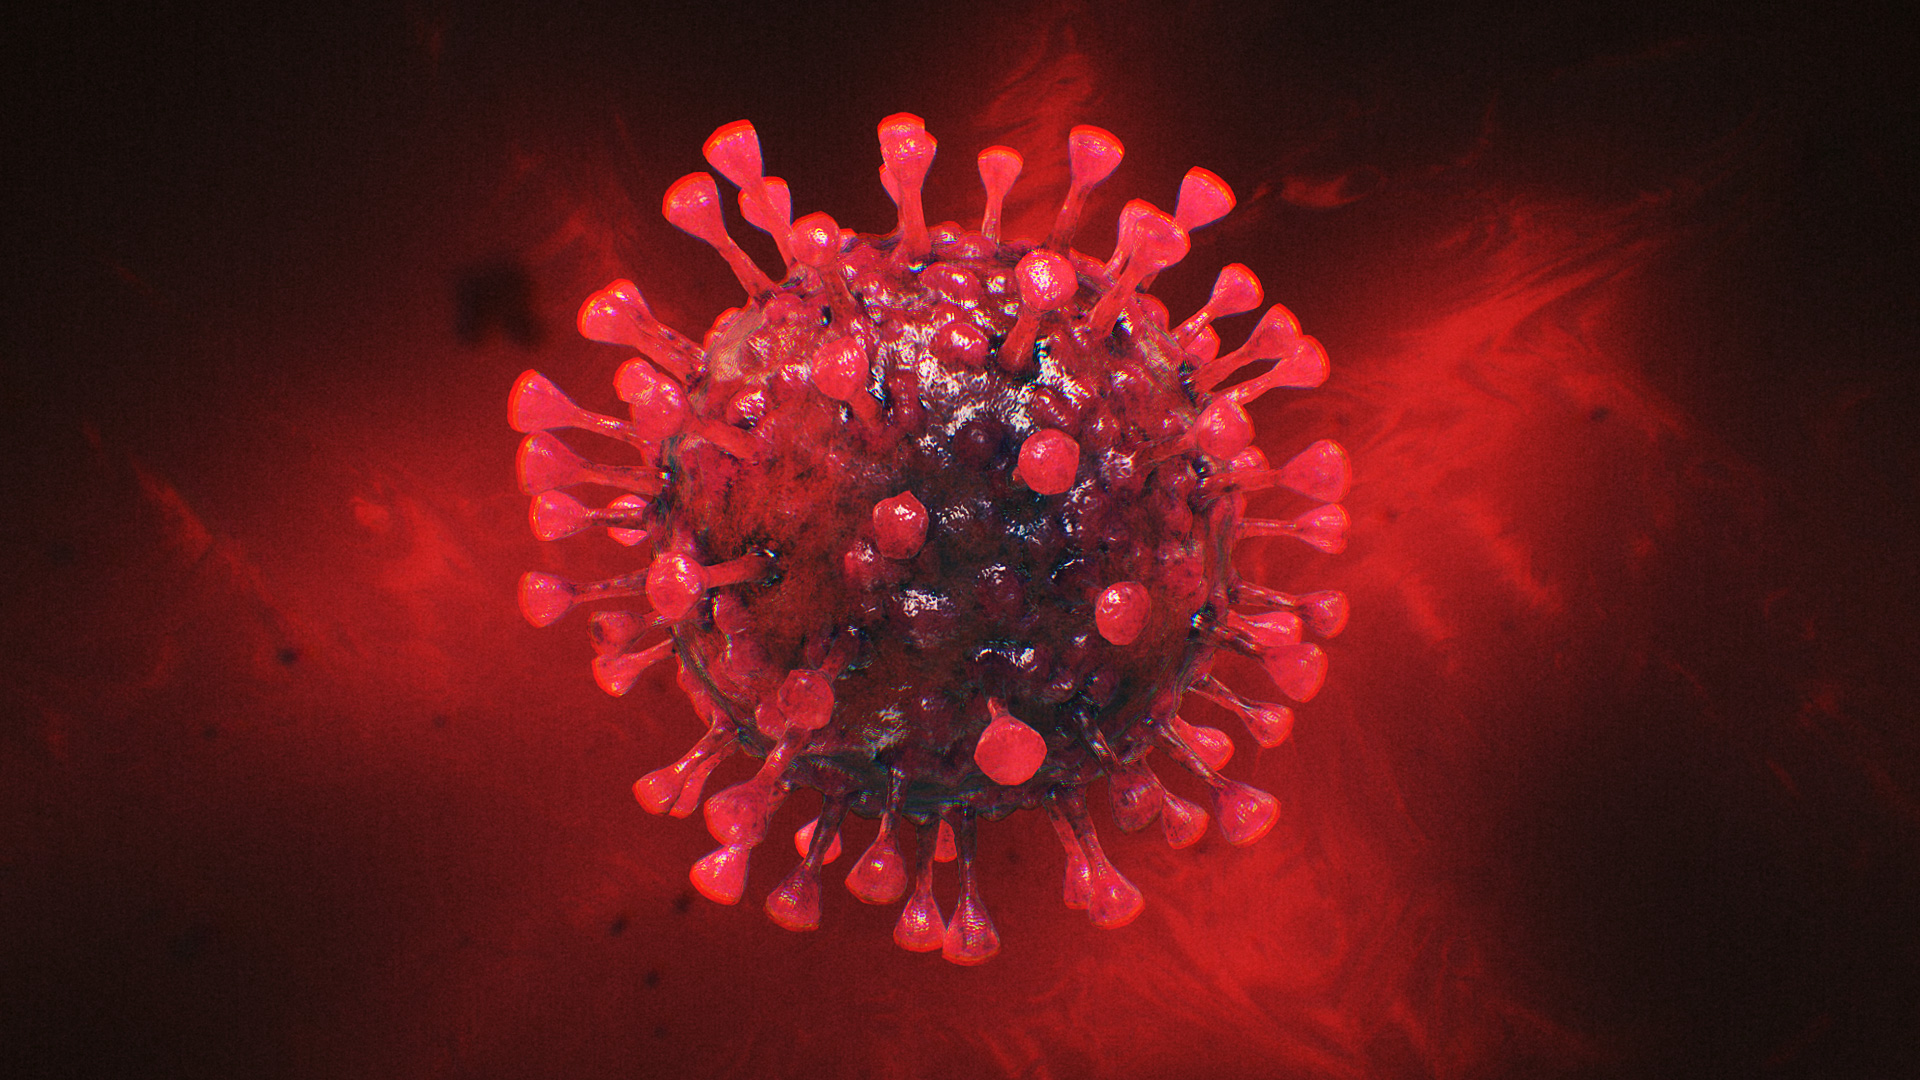 Download Coronavirus Video Effects, Overlays and Backgrounds - Video Production News